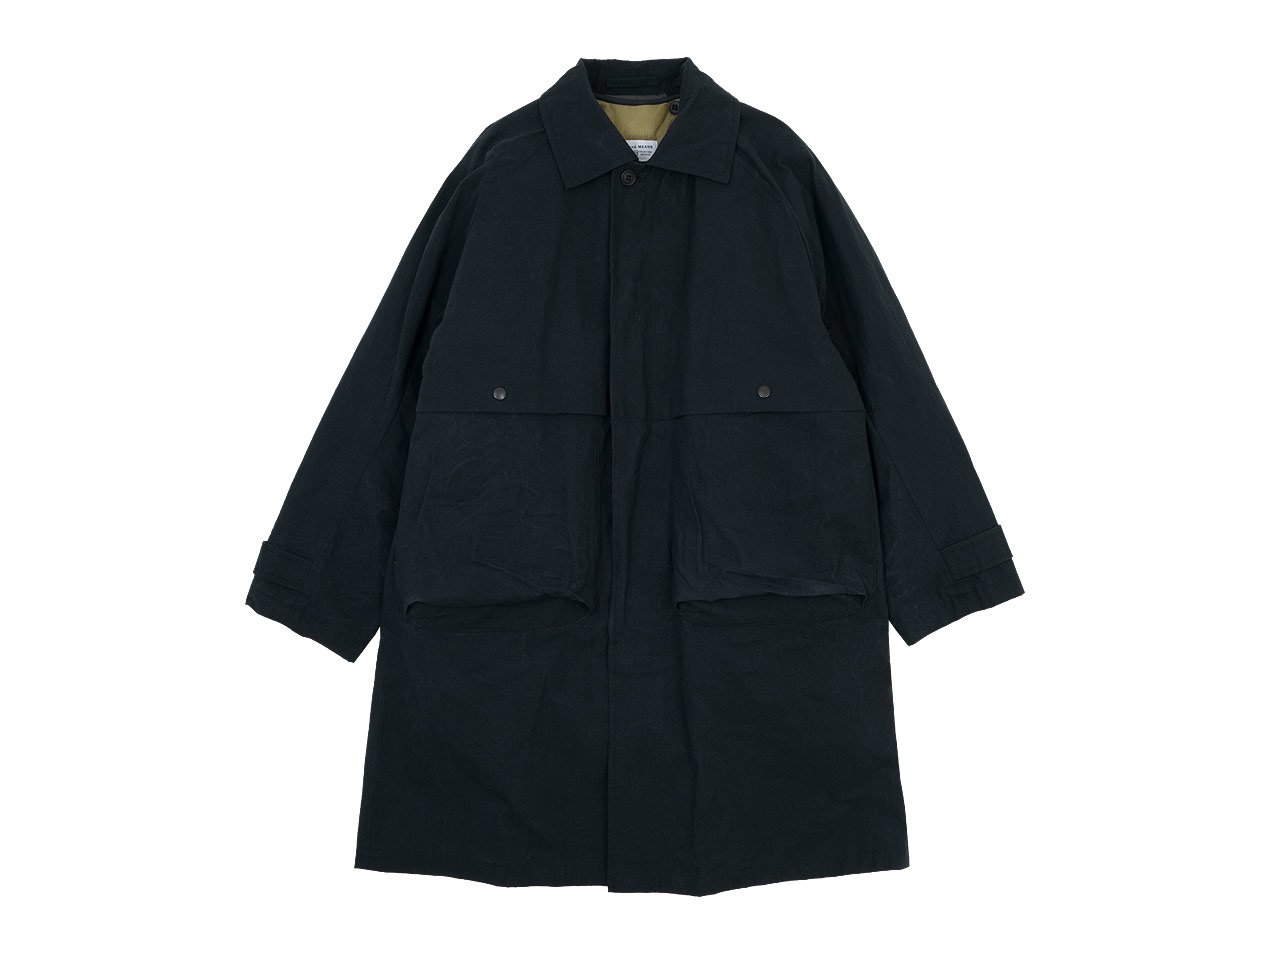 ENDS and MEANS Journalist Coat BLACK